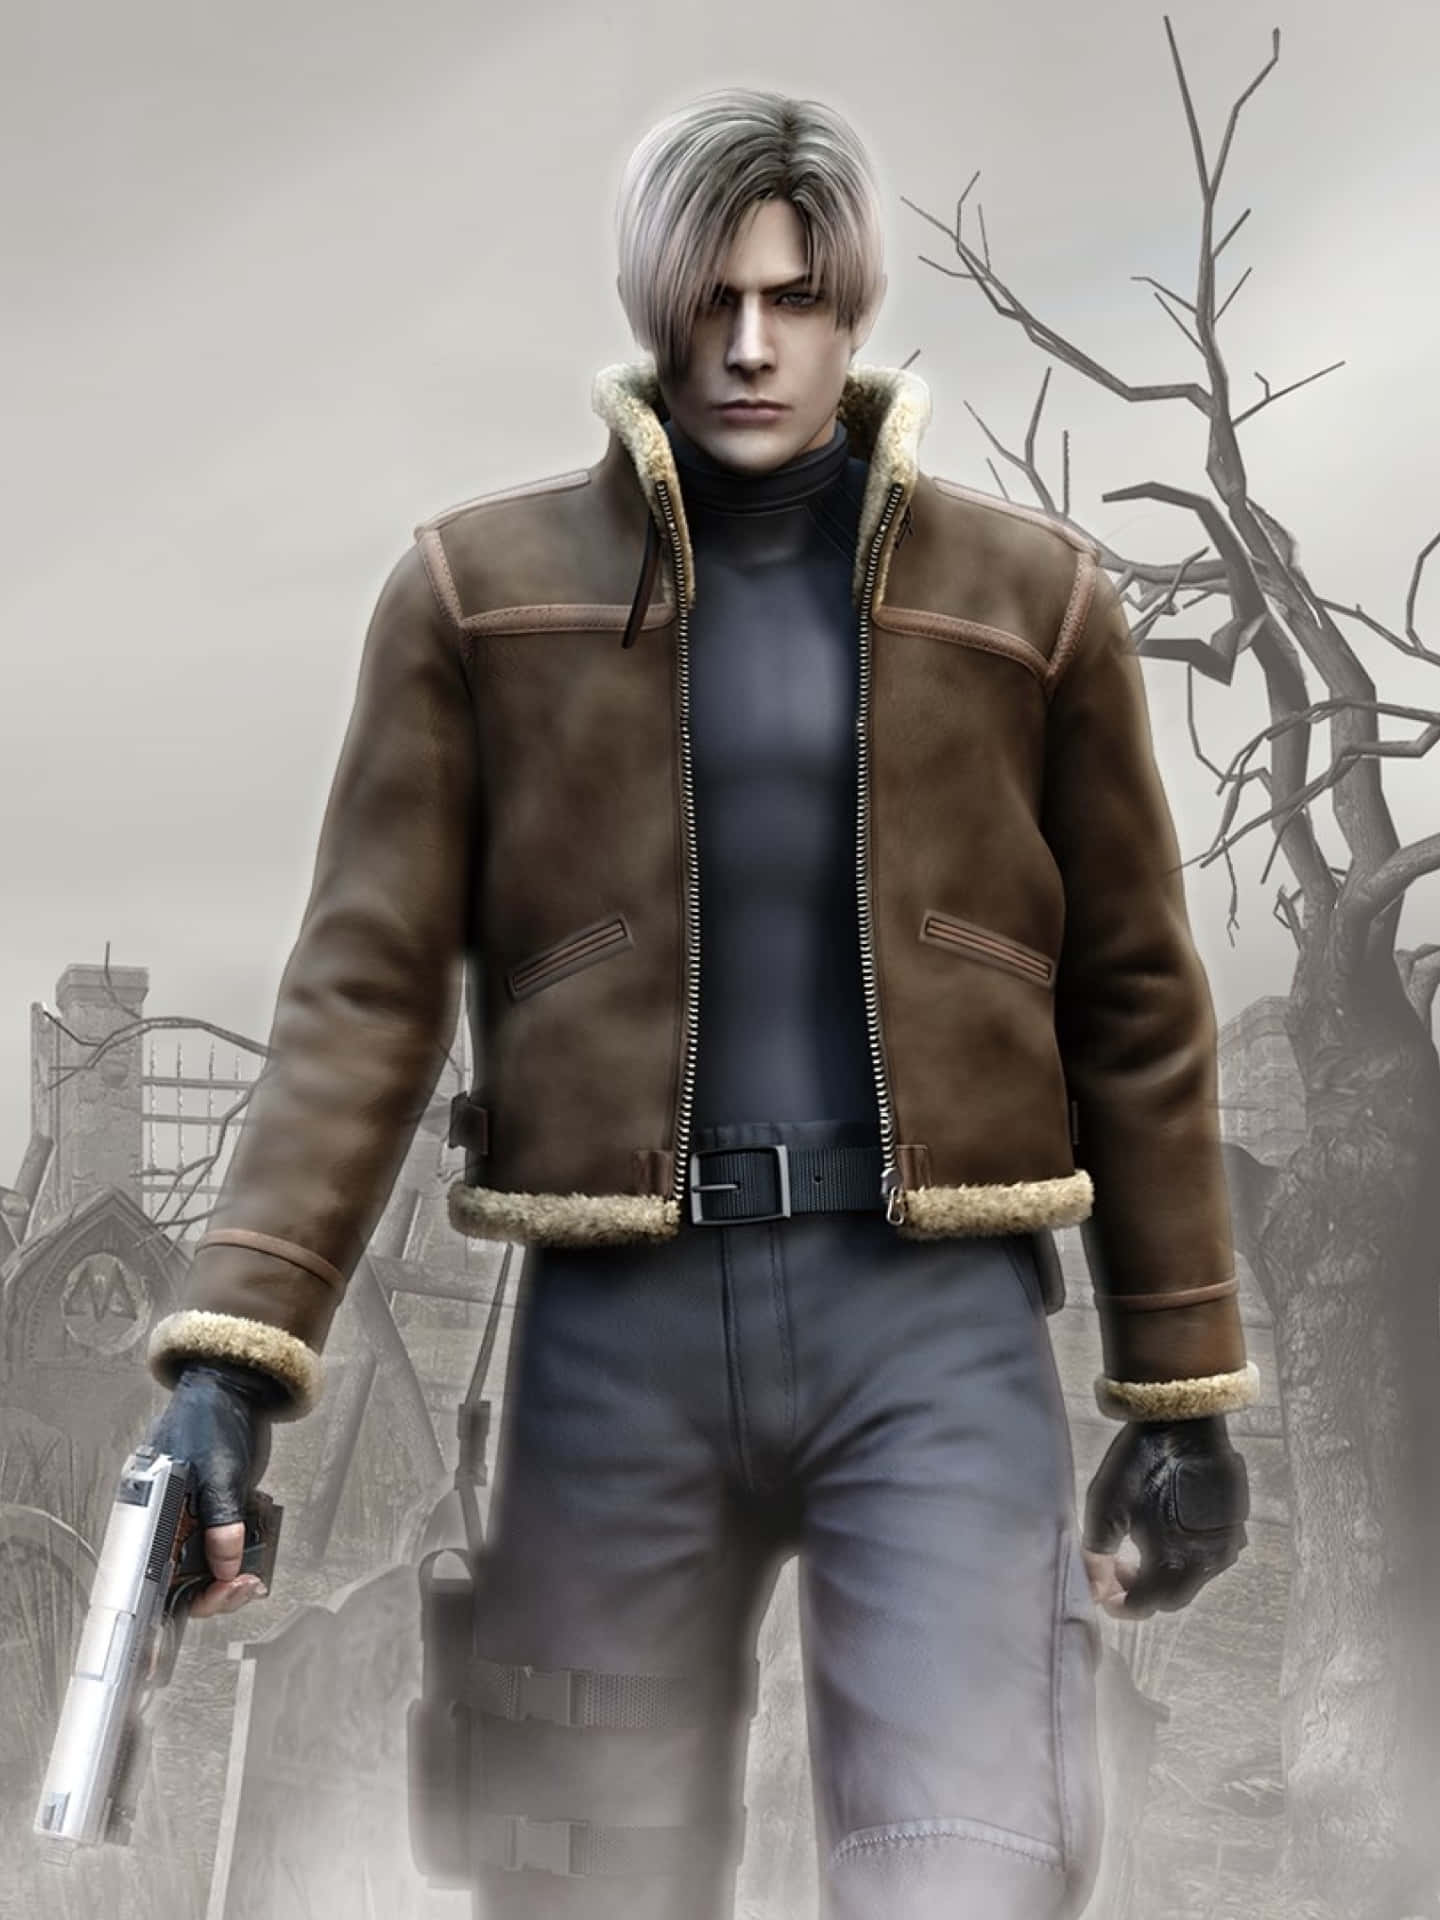 Leon S. Kennedy - A Determined Combatant Against Bio-terror. Wallpaper